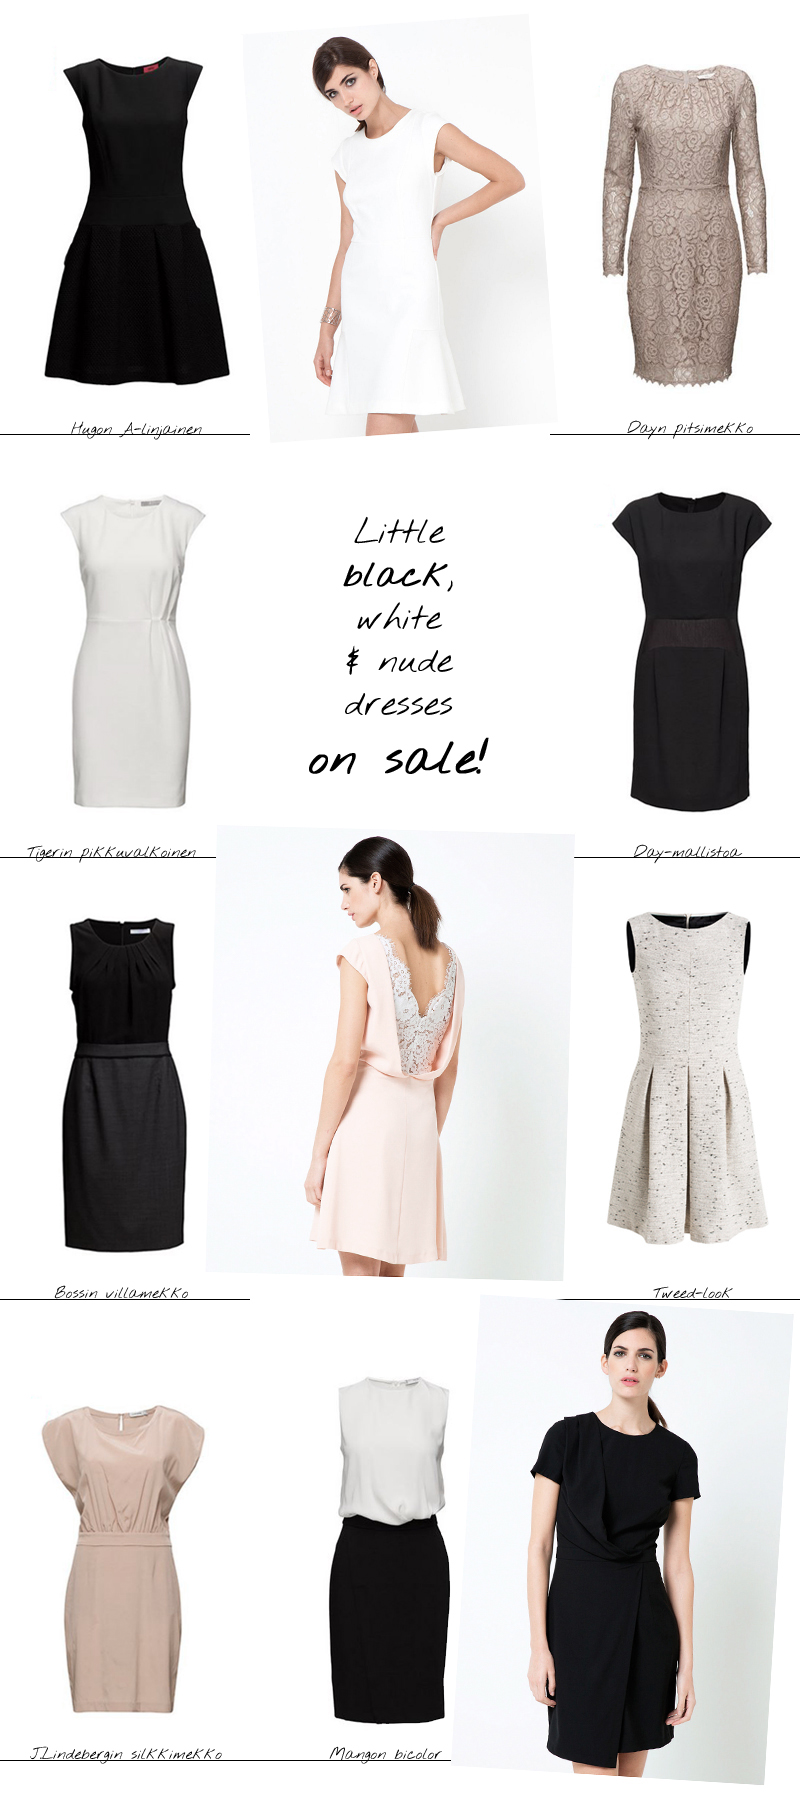 Classic dresses on sale from Boss, Hugo, By Malene Birger...